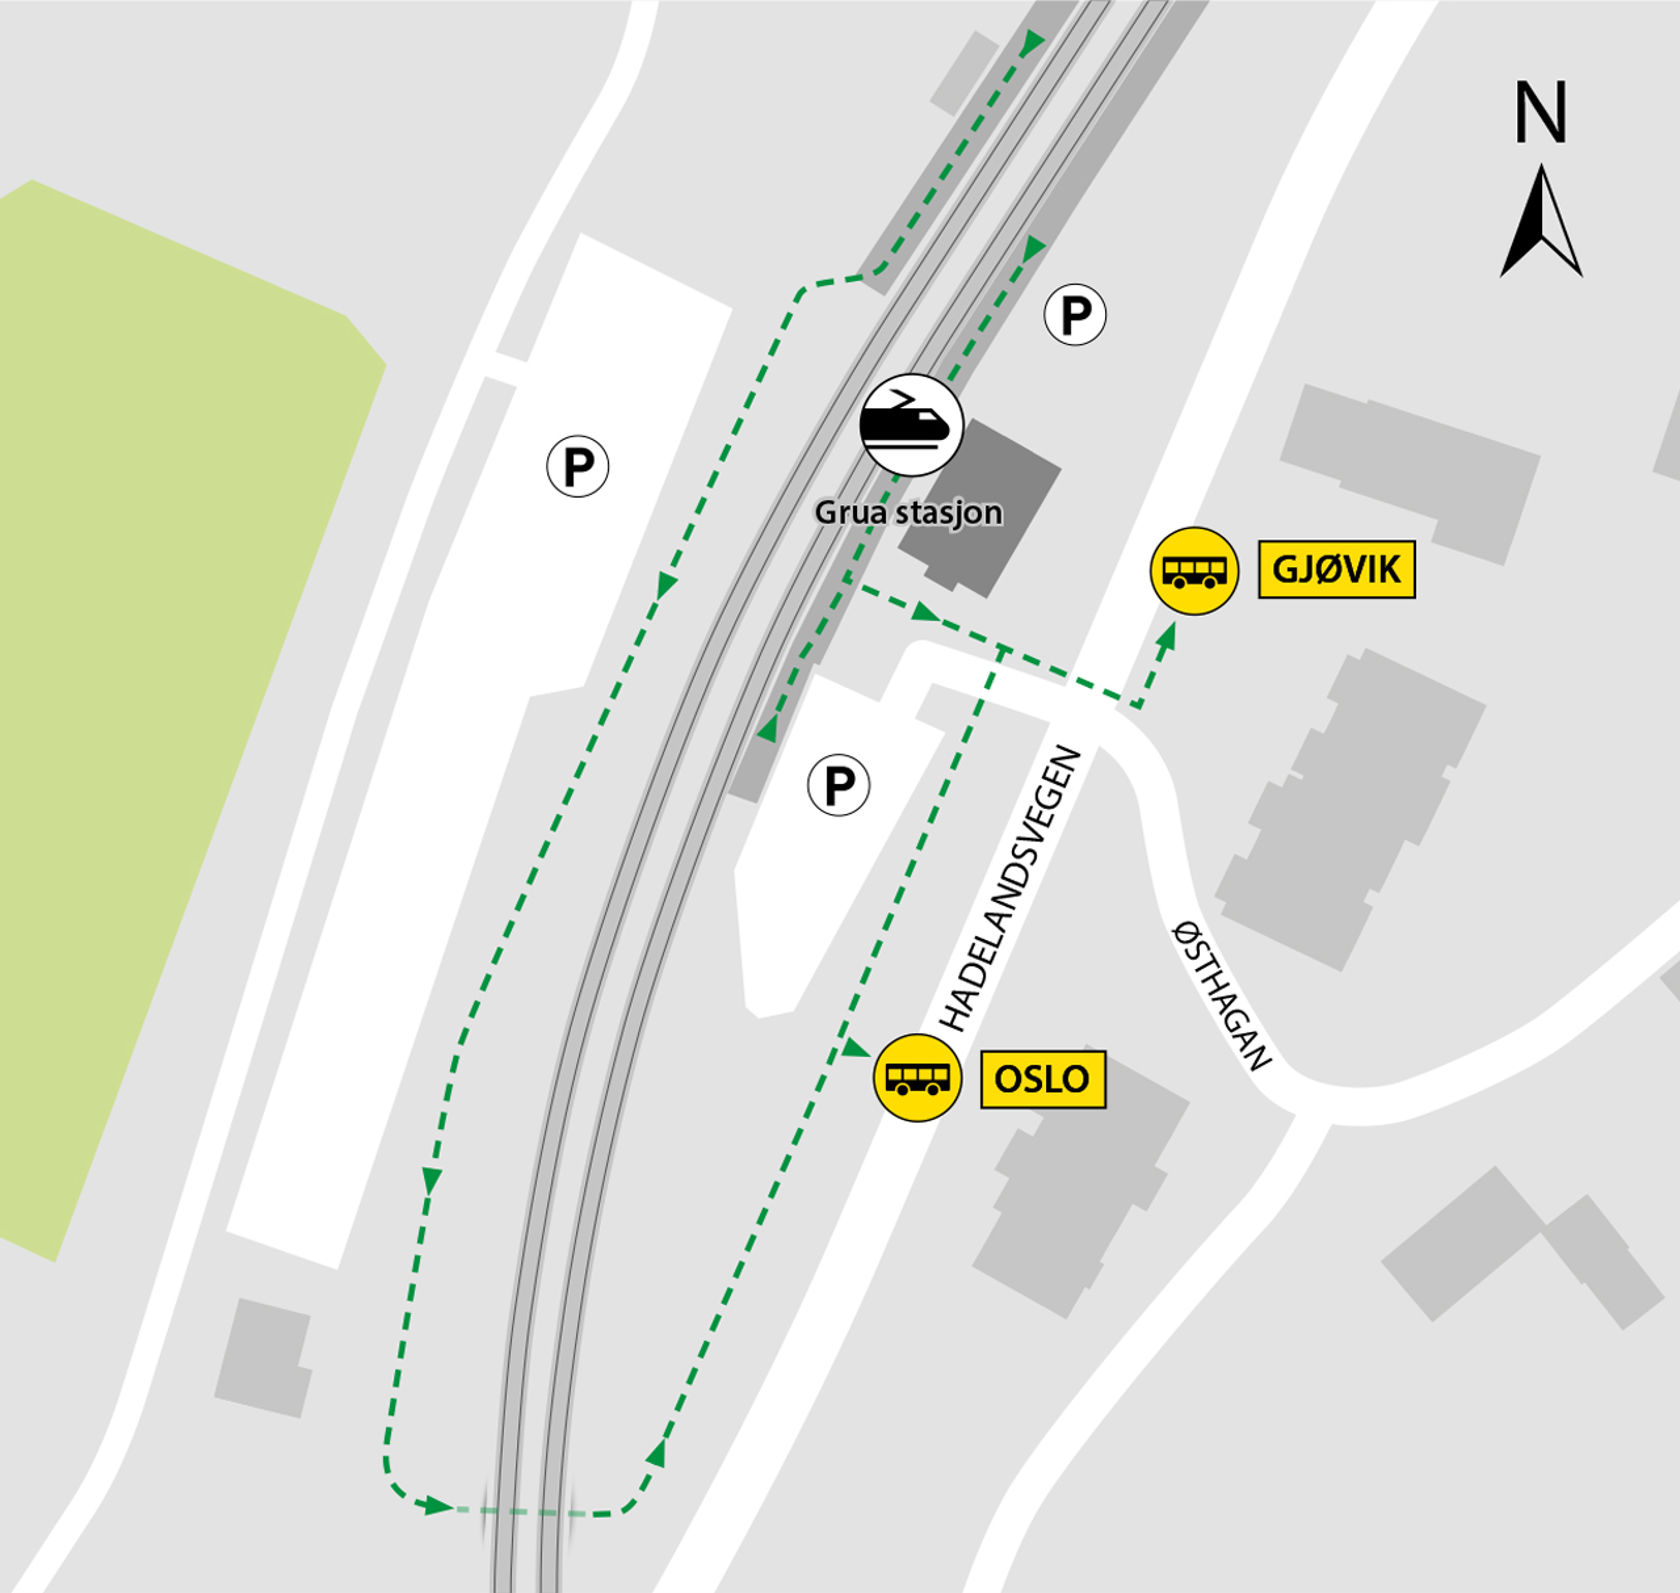 The map shows that the buses run from the Grua station bus stop.